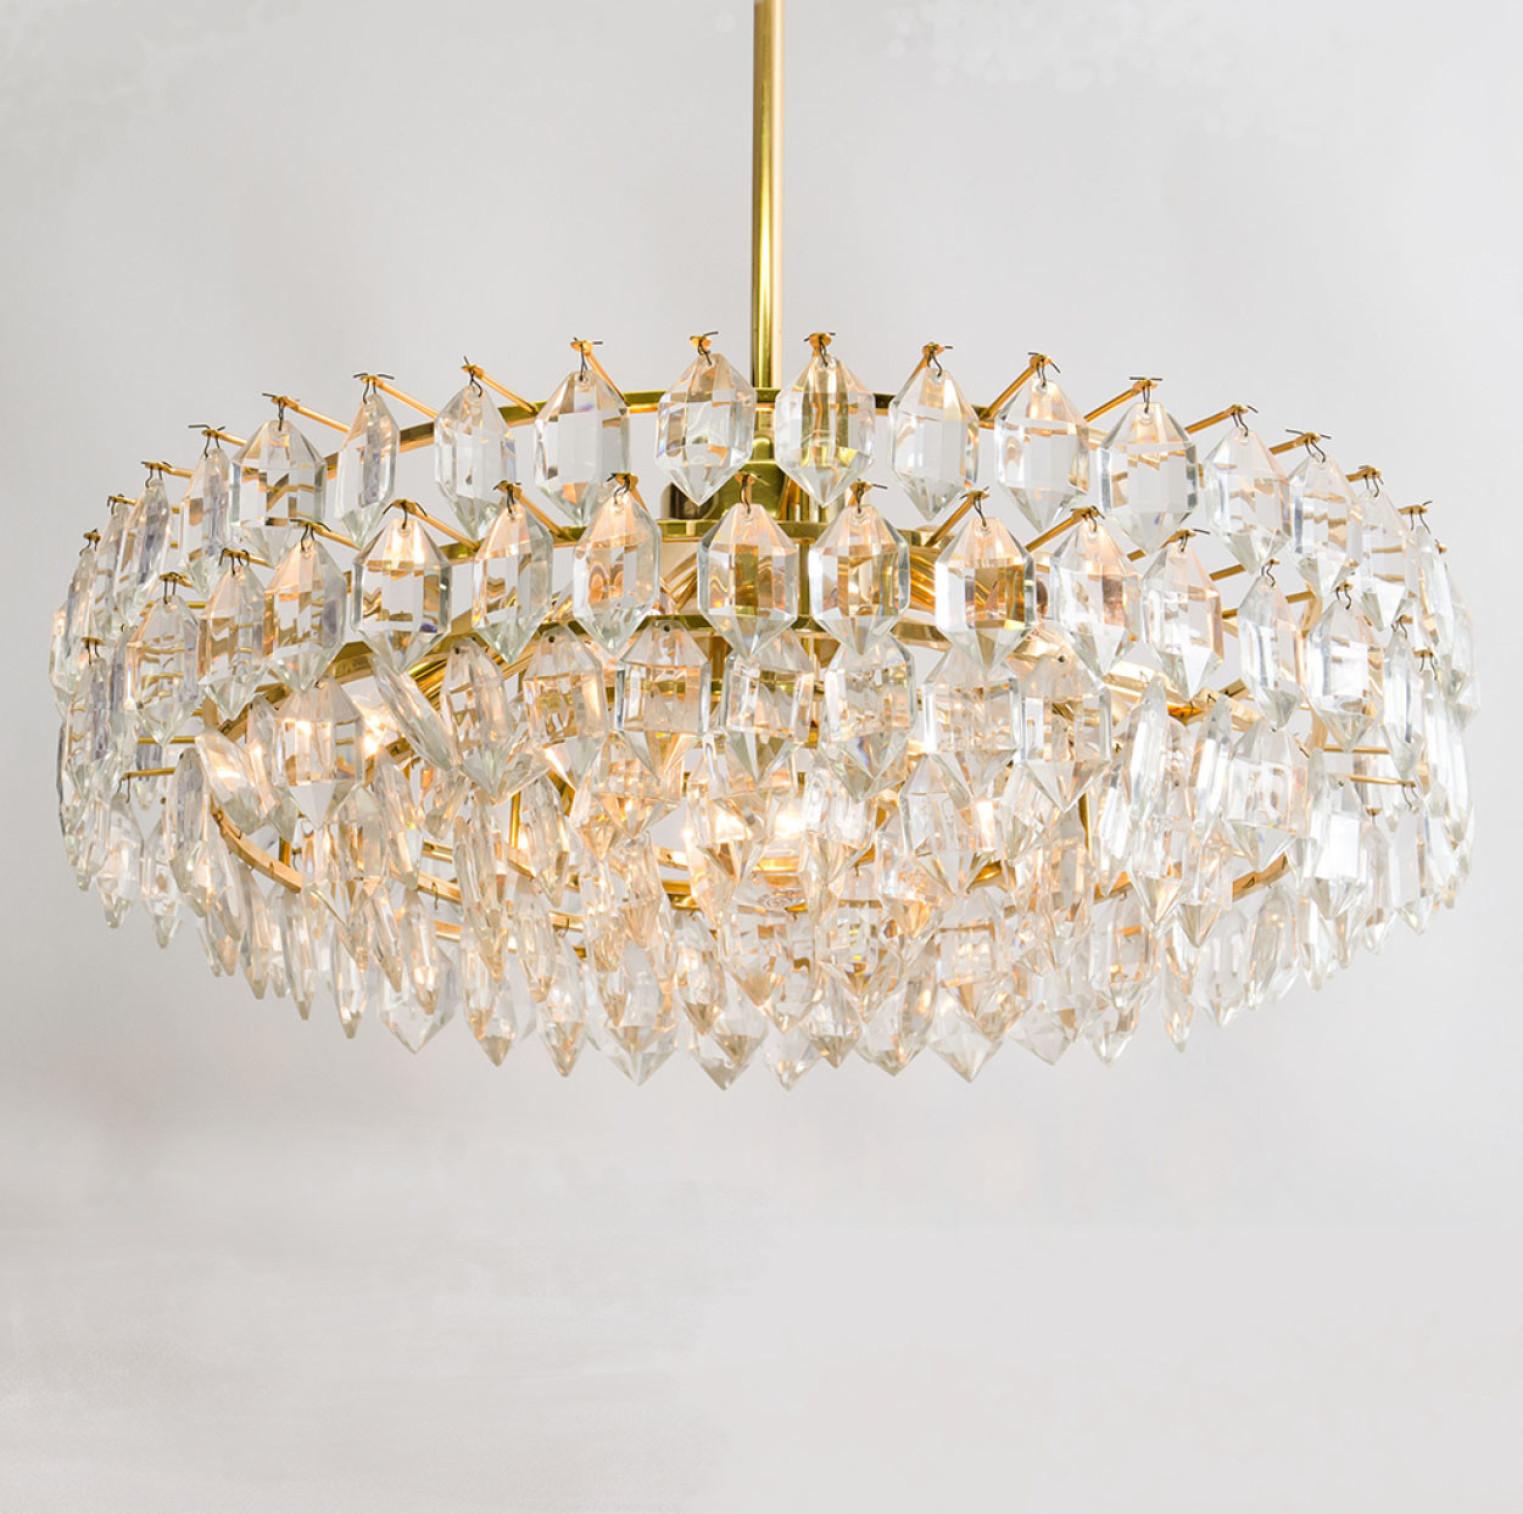 Pair of Bakalowits & Sohne Chandeliers, Brass and Crystal Glass, Austria, 1960s For Sale 4